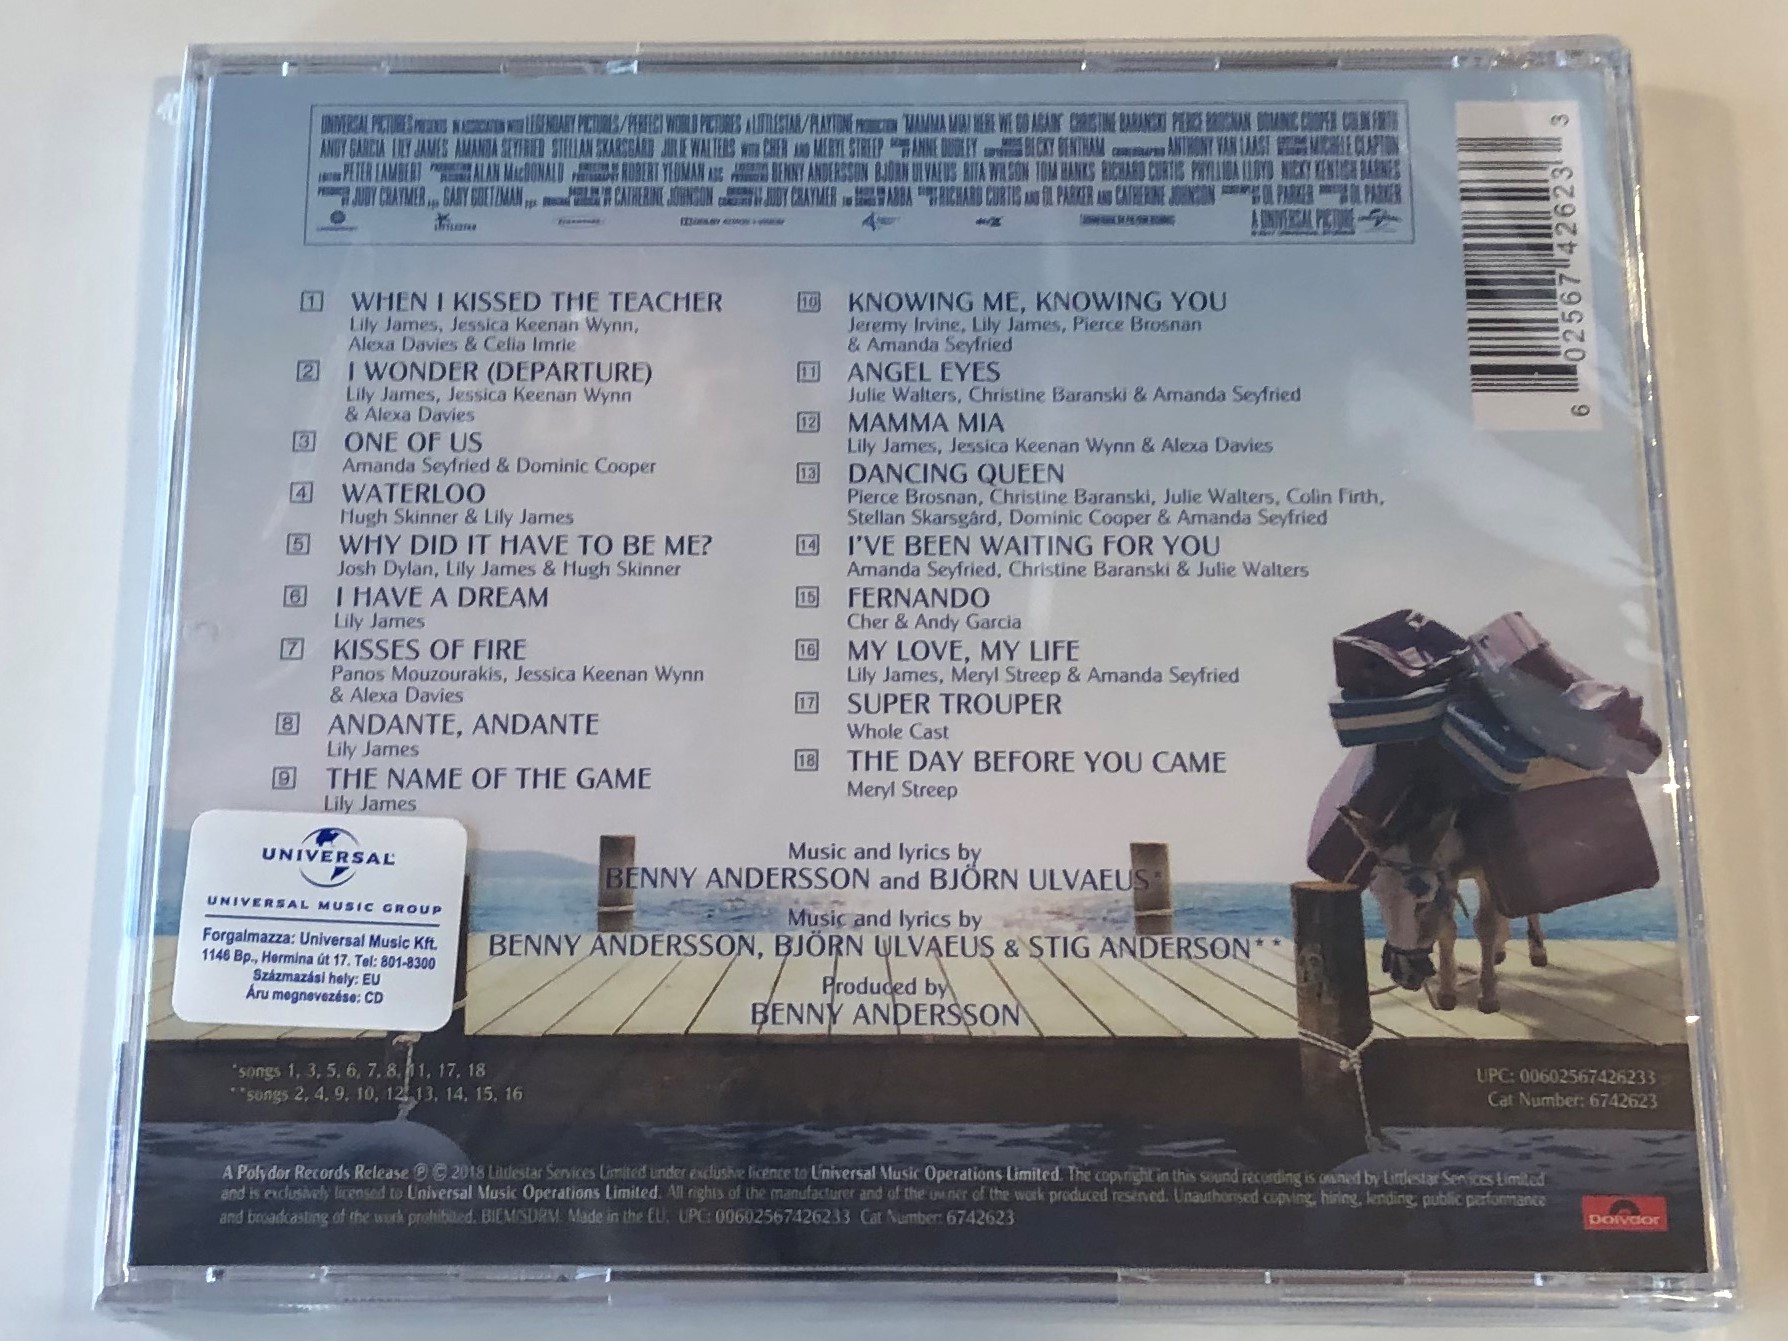 mamma-mia-here-we-go-again-the-movie-soundtrack-featuring-the-songs-of-abba-polydor-audio-cd-2018-6742623-2-.jpg